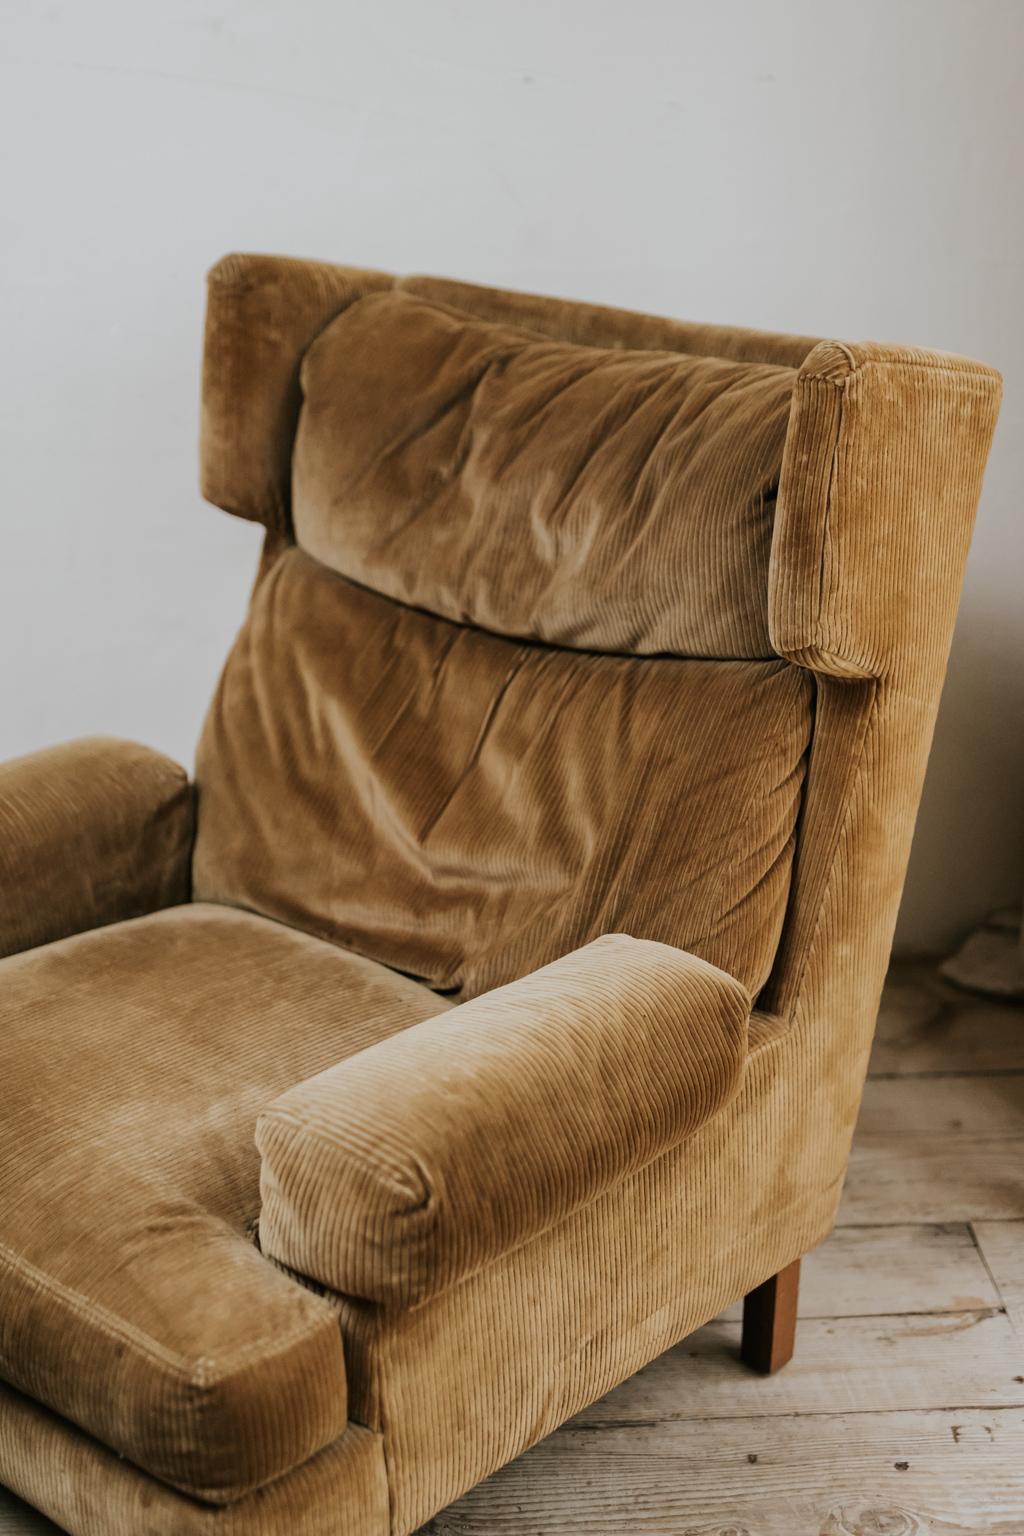 The most comfortable armchair and ottoman you can imagine, made in the 1950s, covered with its original curduroy fabric,
Big risk if you get in you possible can't get out of it.
Dimensions: Armchair 100 cm high, seat 42 cm x 100 cm deep and 92 cm